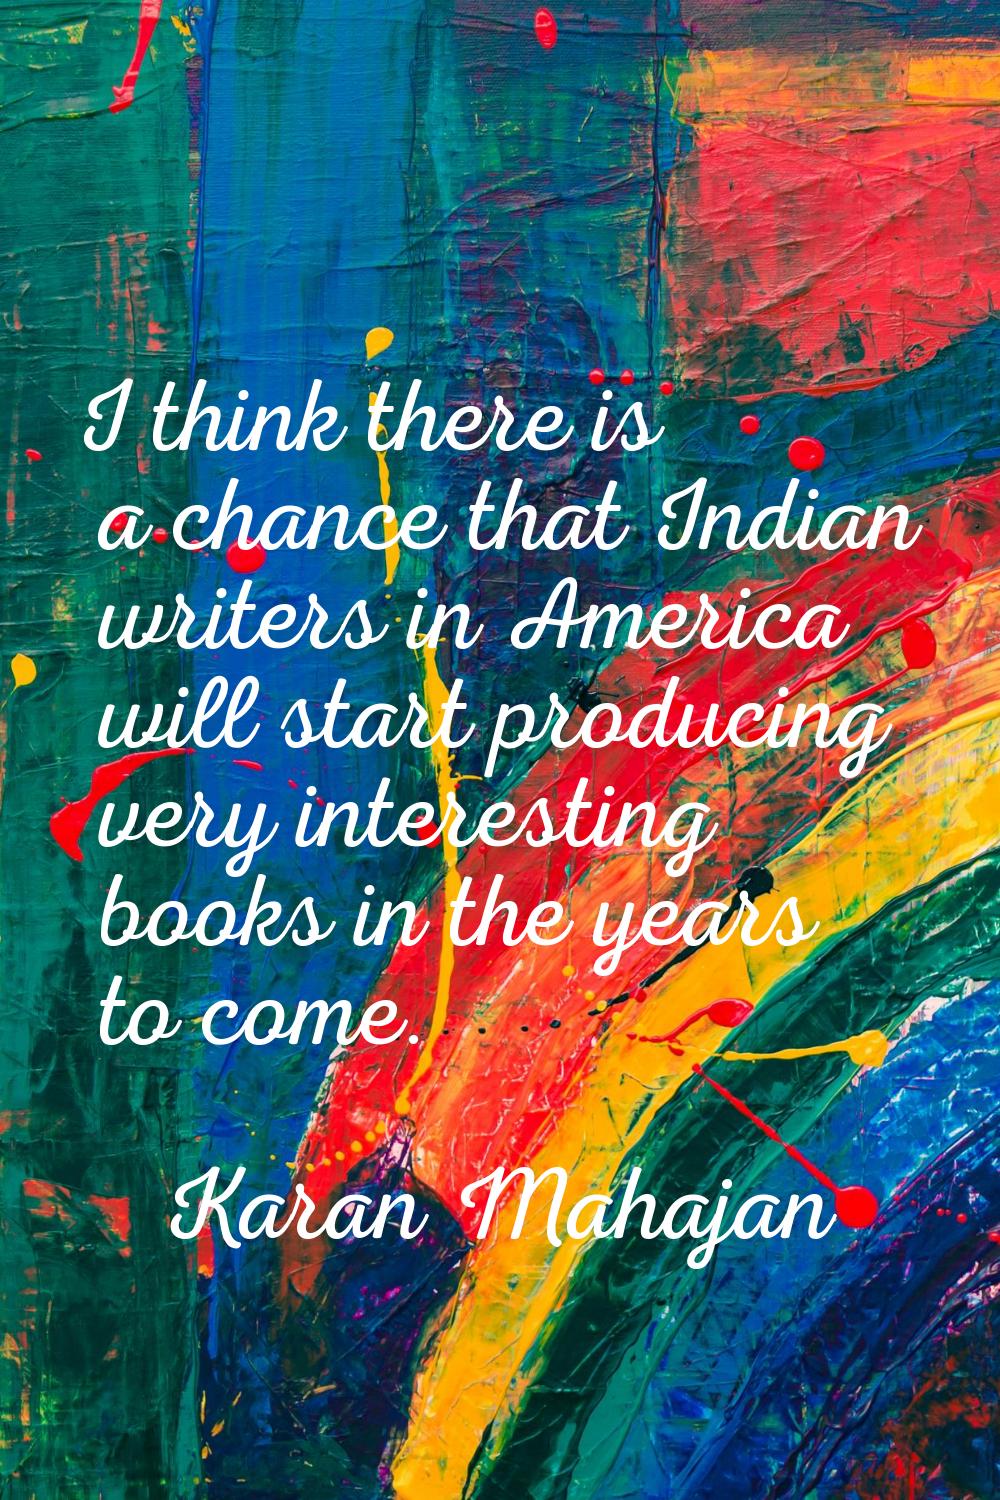 I think there is a chance that Indian writers in America will start producing very interesting book